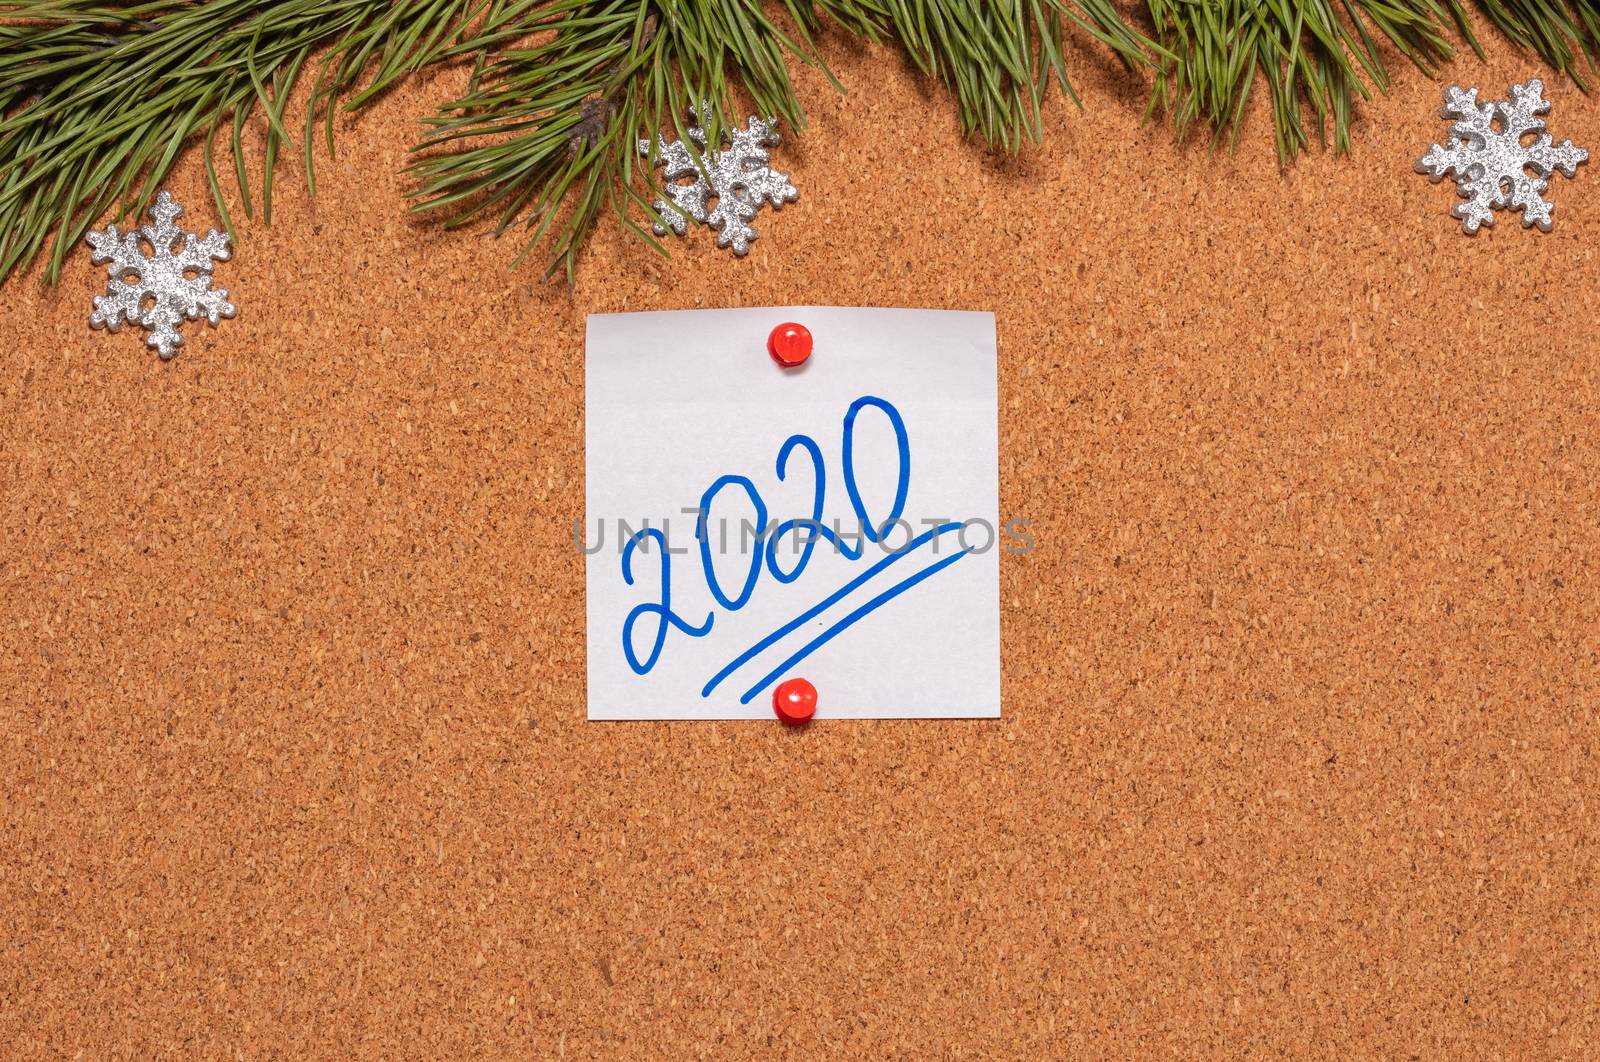 White sticky note with 2020 handwritten on it pinned on notice board which is decorated with pine twigs and snowflakes. 2020 Christmas, new years celebration season concept. Close-up shot.